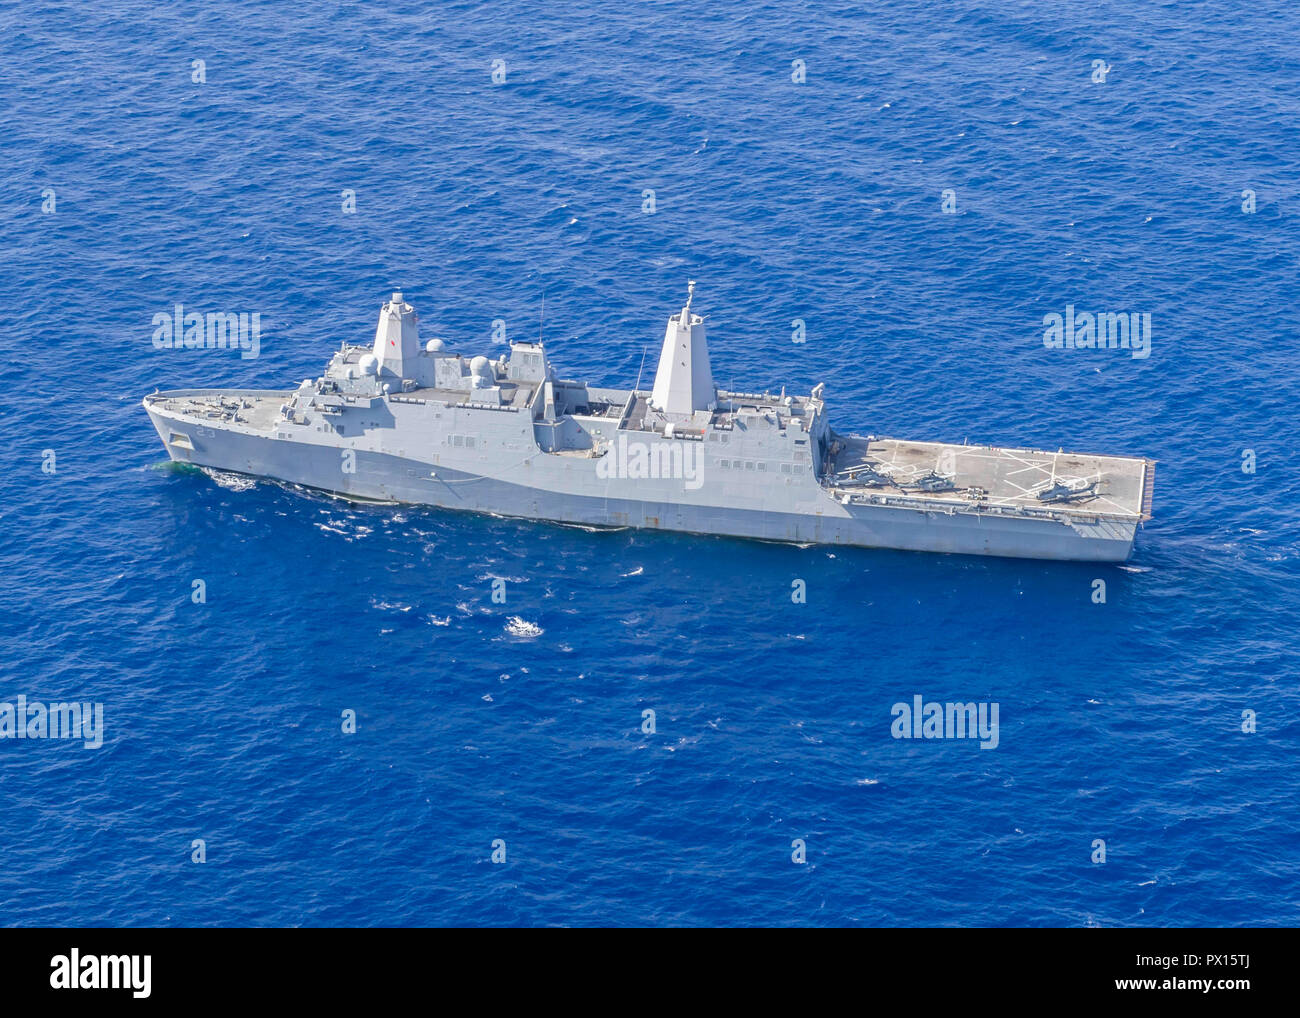 181015-N-PH222-1433 MEDITERRANEAN SEA (Oct. 15, 2018) The San Antonio-class amphibious transport dock ship USS Anchorage (LPD 23) transits the Mediterranean Sea, Oct. 15, 2018. Anchorage and embarked 13th Marine Expeditionary Unit are deployed to the U.S. 6th Fleet area of operations as a crisis response force in support of regional partners as well as to promote U.S. national security interests in Europe and Africa. (U.S. Navy photo by Mass Communication Specialist 3rd Class Ryan M. Breeden/Released) Stock Photo